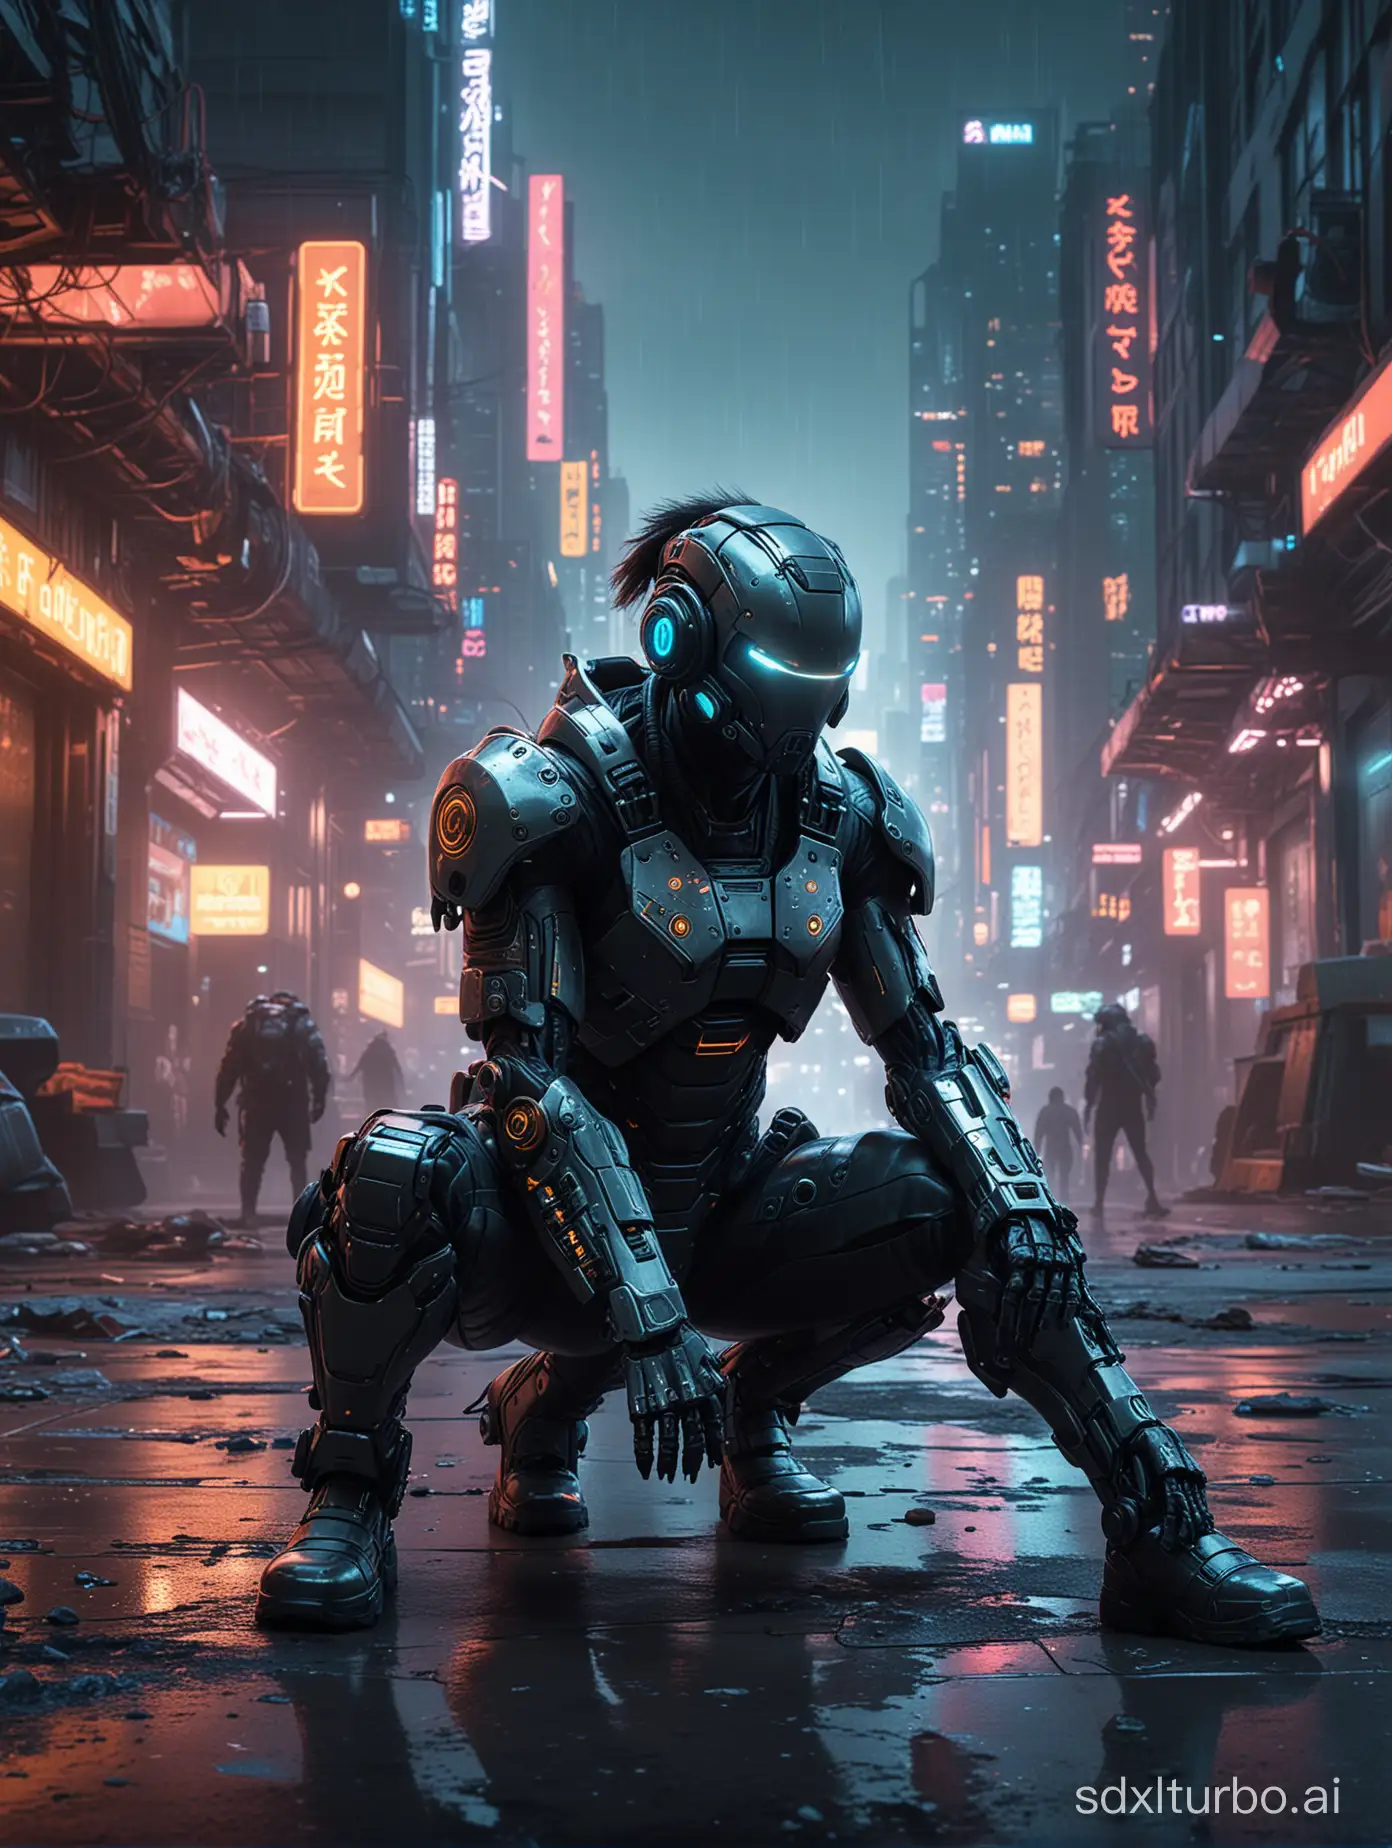 Cyberpunk warrior landing on the ground in a crouching position, urban background, futuristic, sci-fi, high-tech, dynamic pose, detailed environment, digital painting by Greg Rutkowsky and Gotham robots, neon lights, cinematic, realistic lighting, dystopian atmosphere, 4k resolution